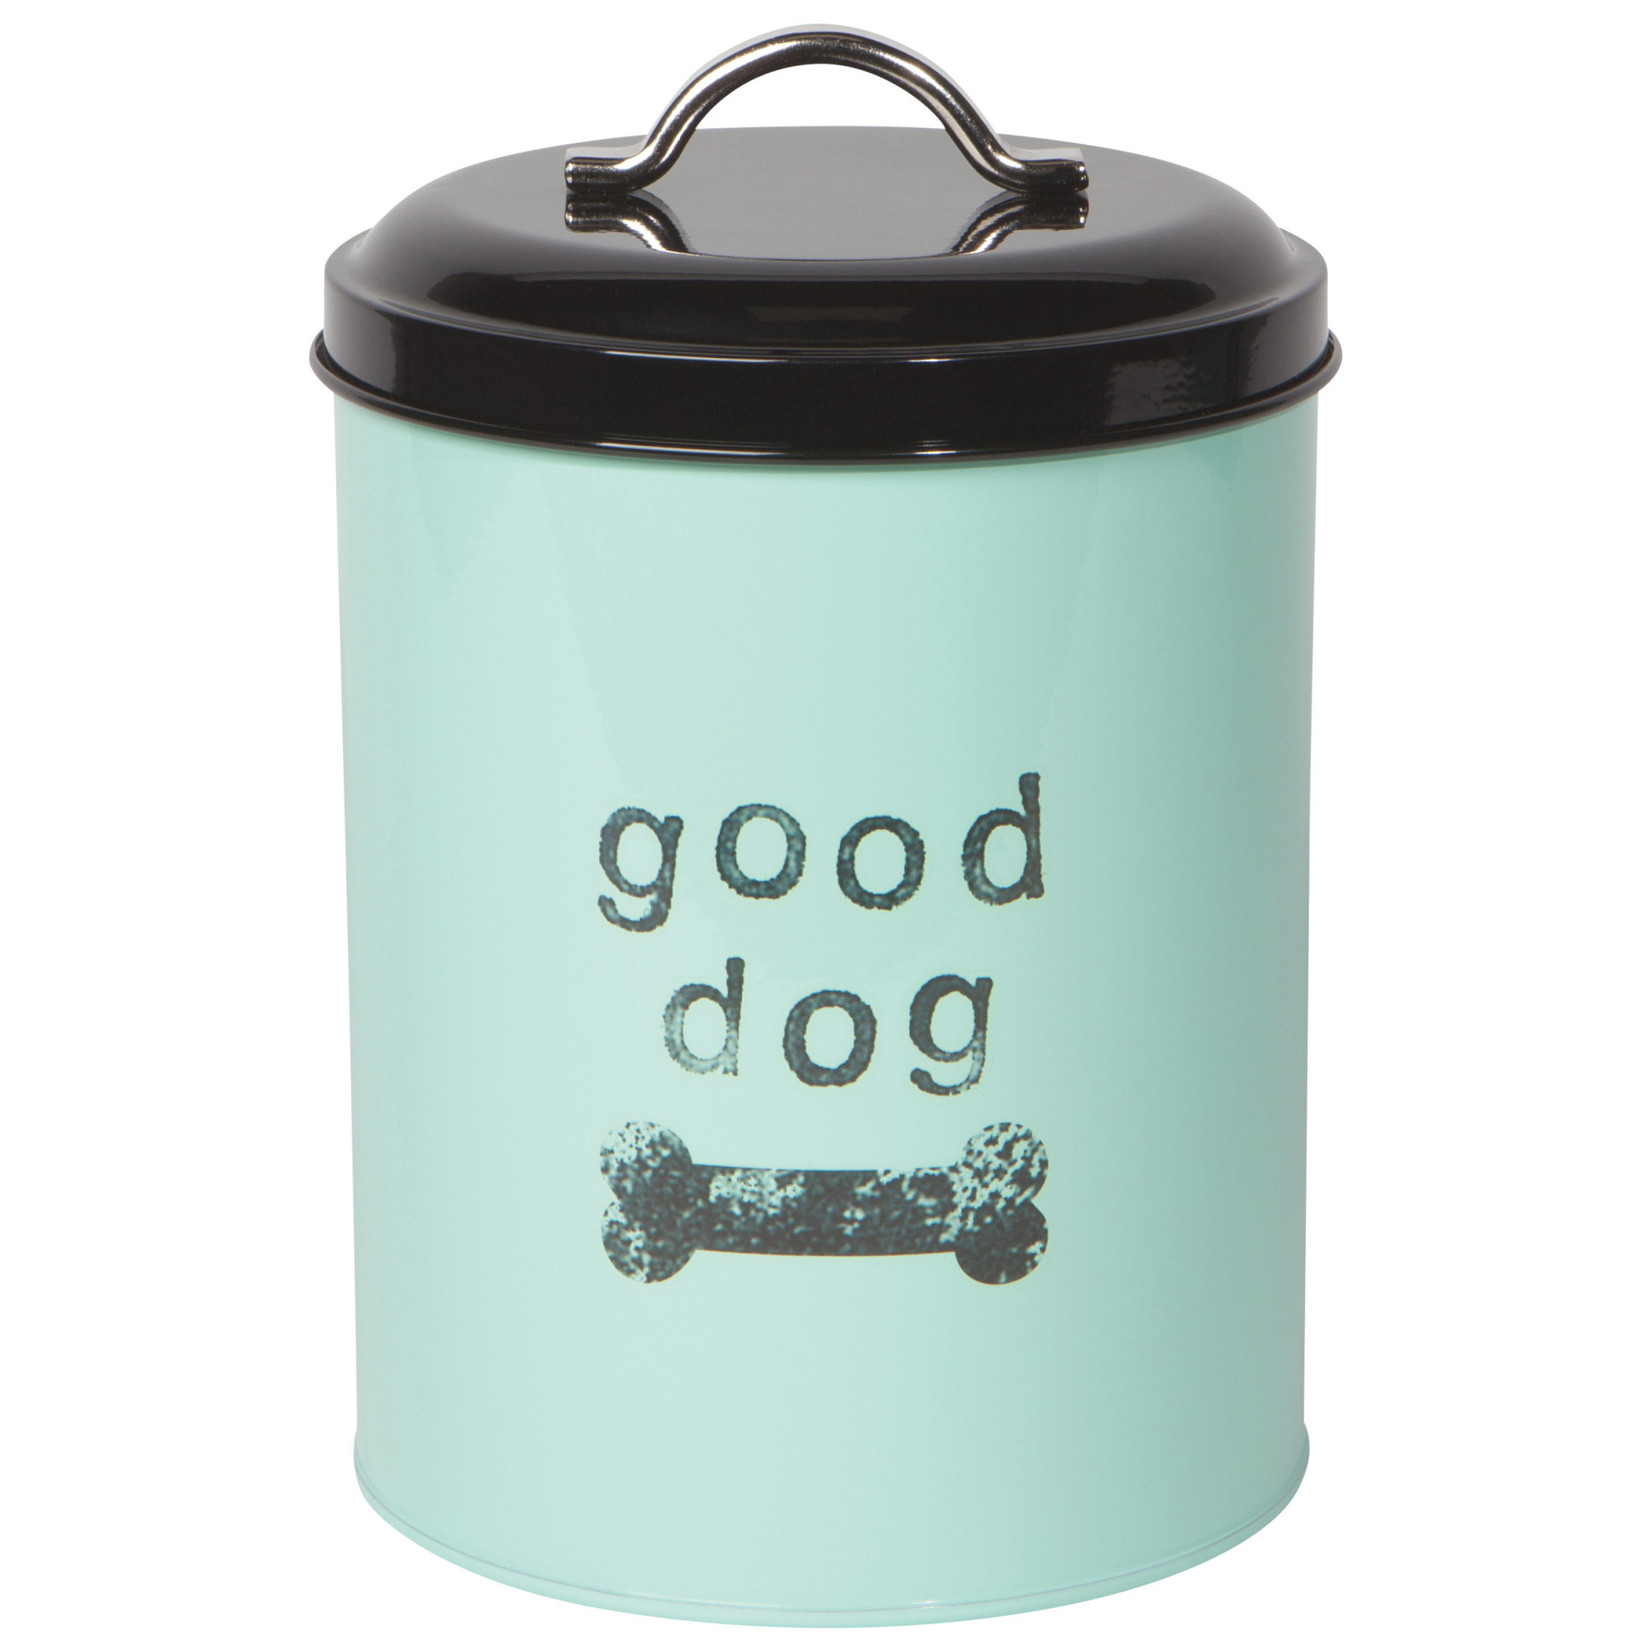 Tin Dog Biscuits Container, Good Dog